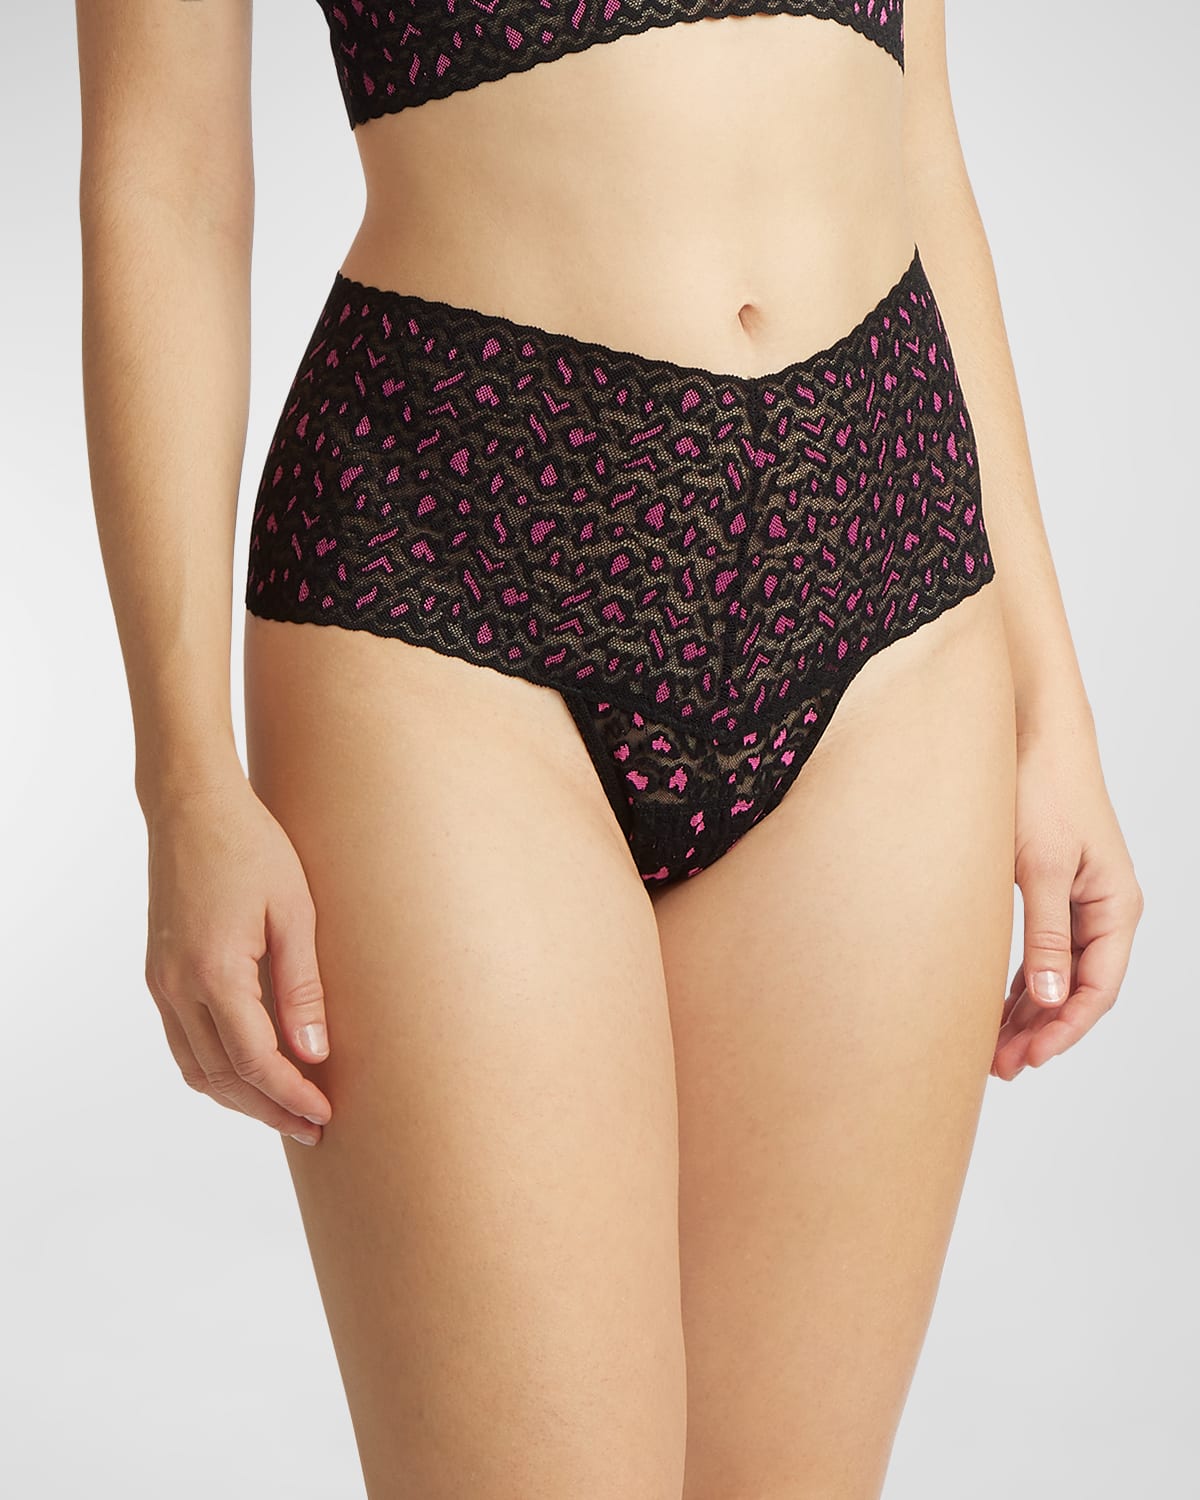 HANKY PANKY CROSS-DYED LEOPARD RETRO LACE THONG